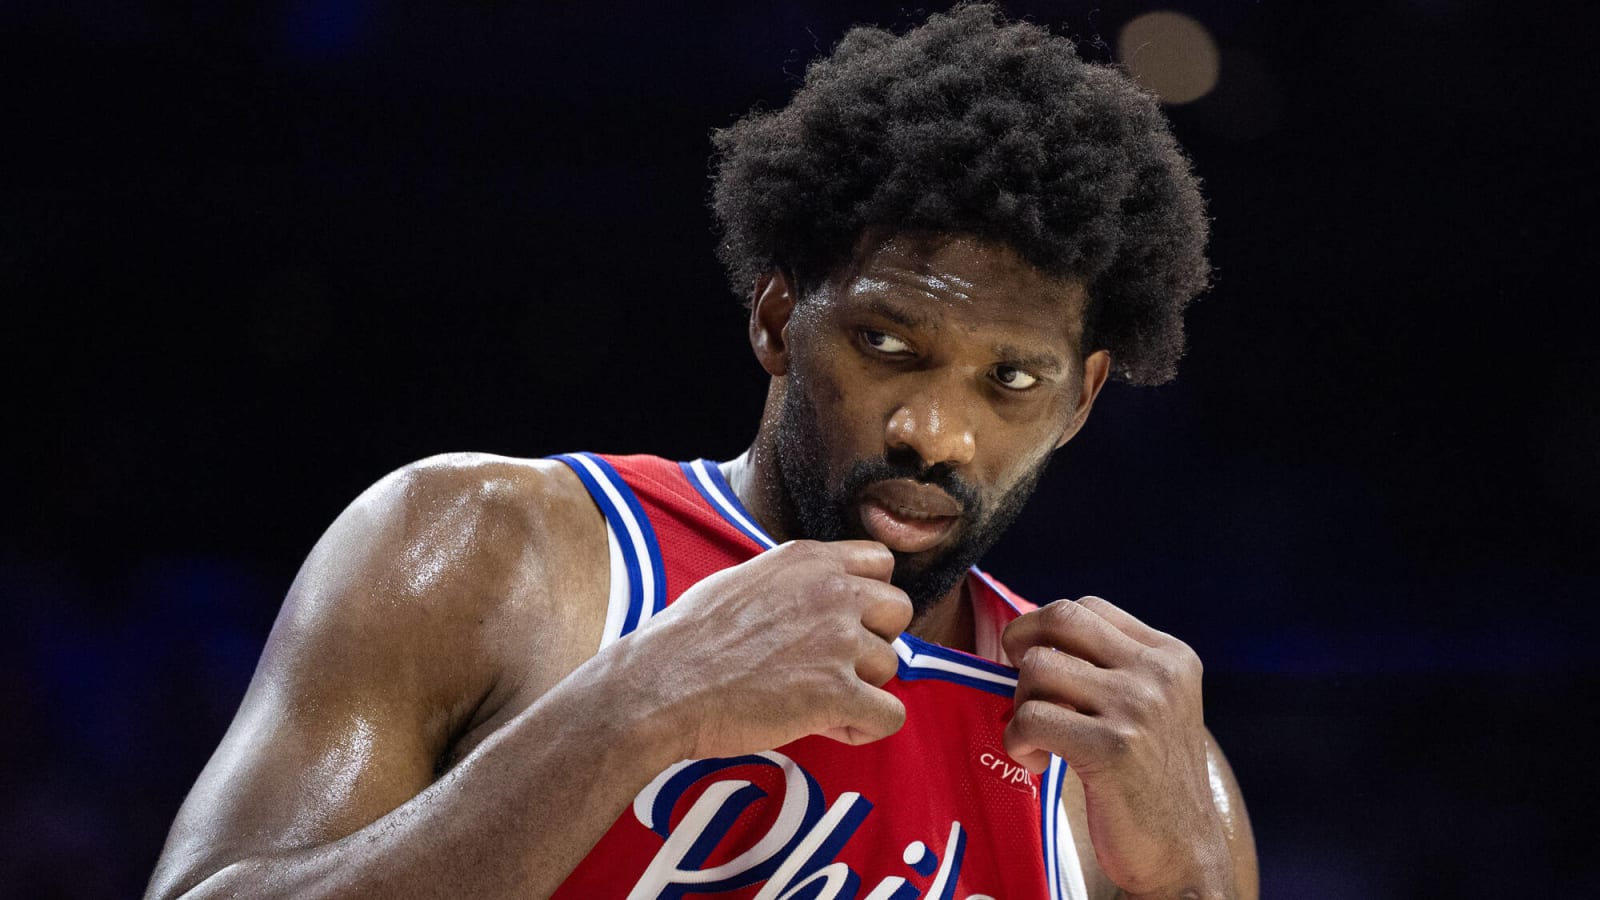 Joel Embiid angered by amount of Knicks fans at Wells Fargo Center for Game 4